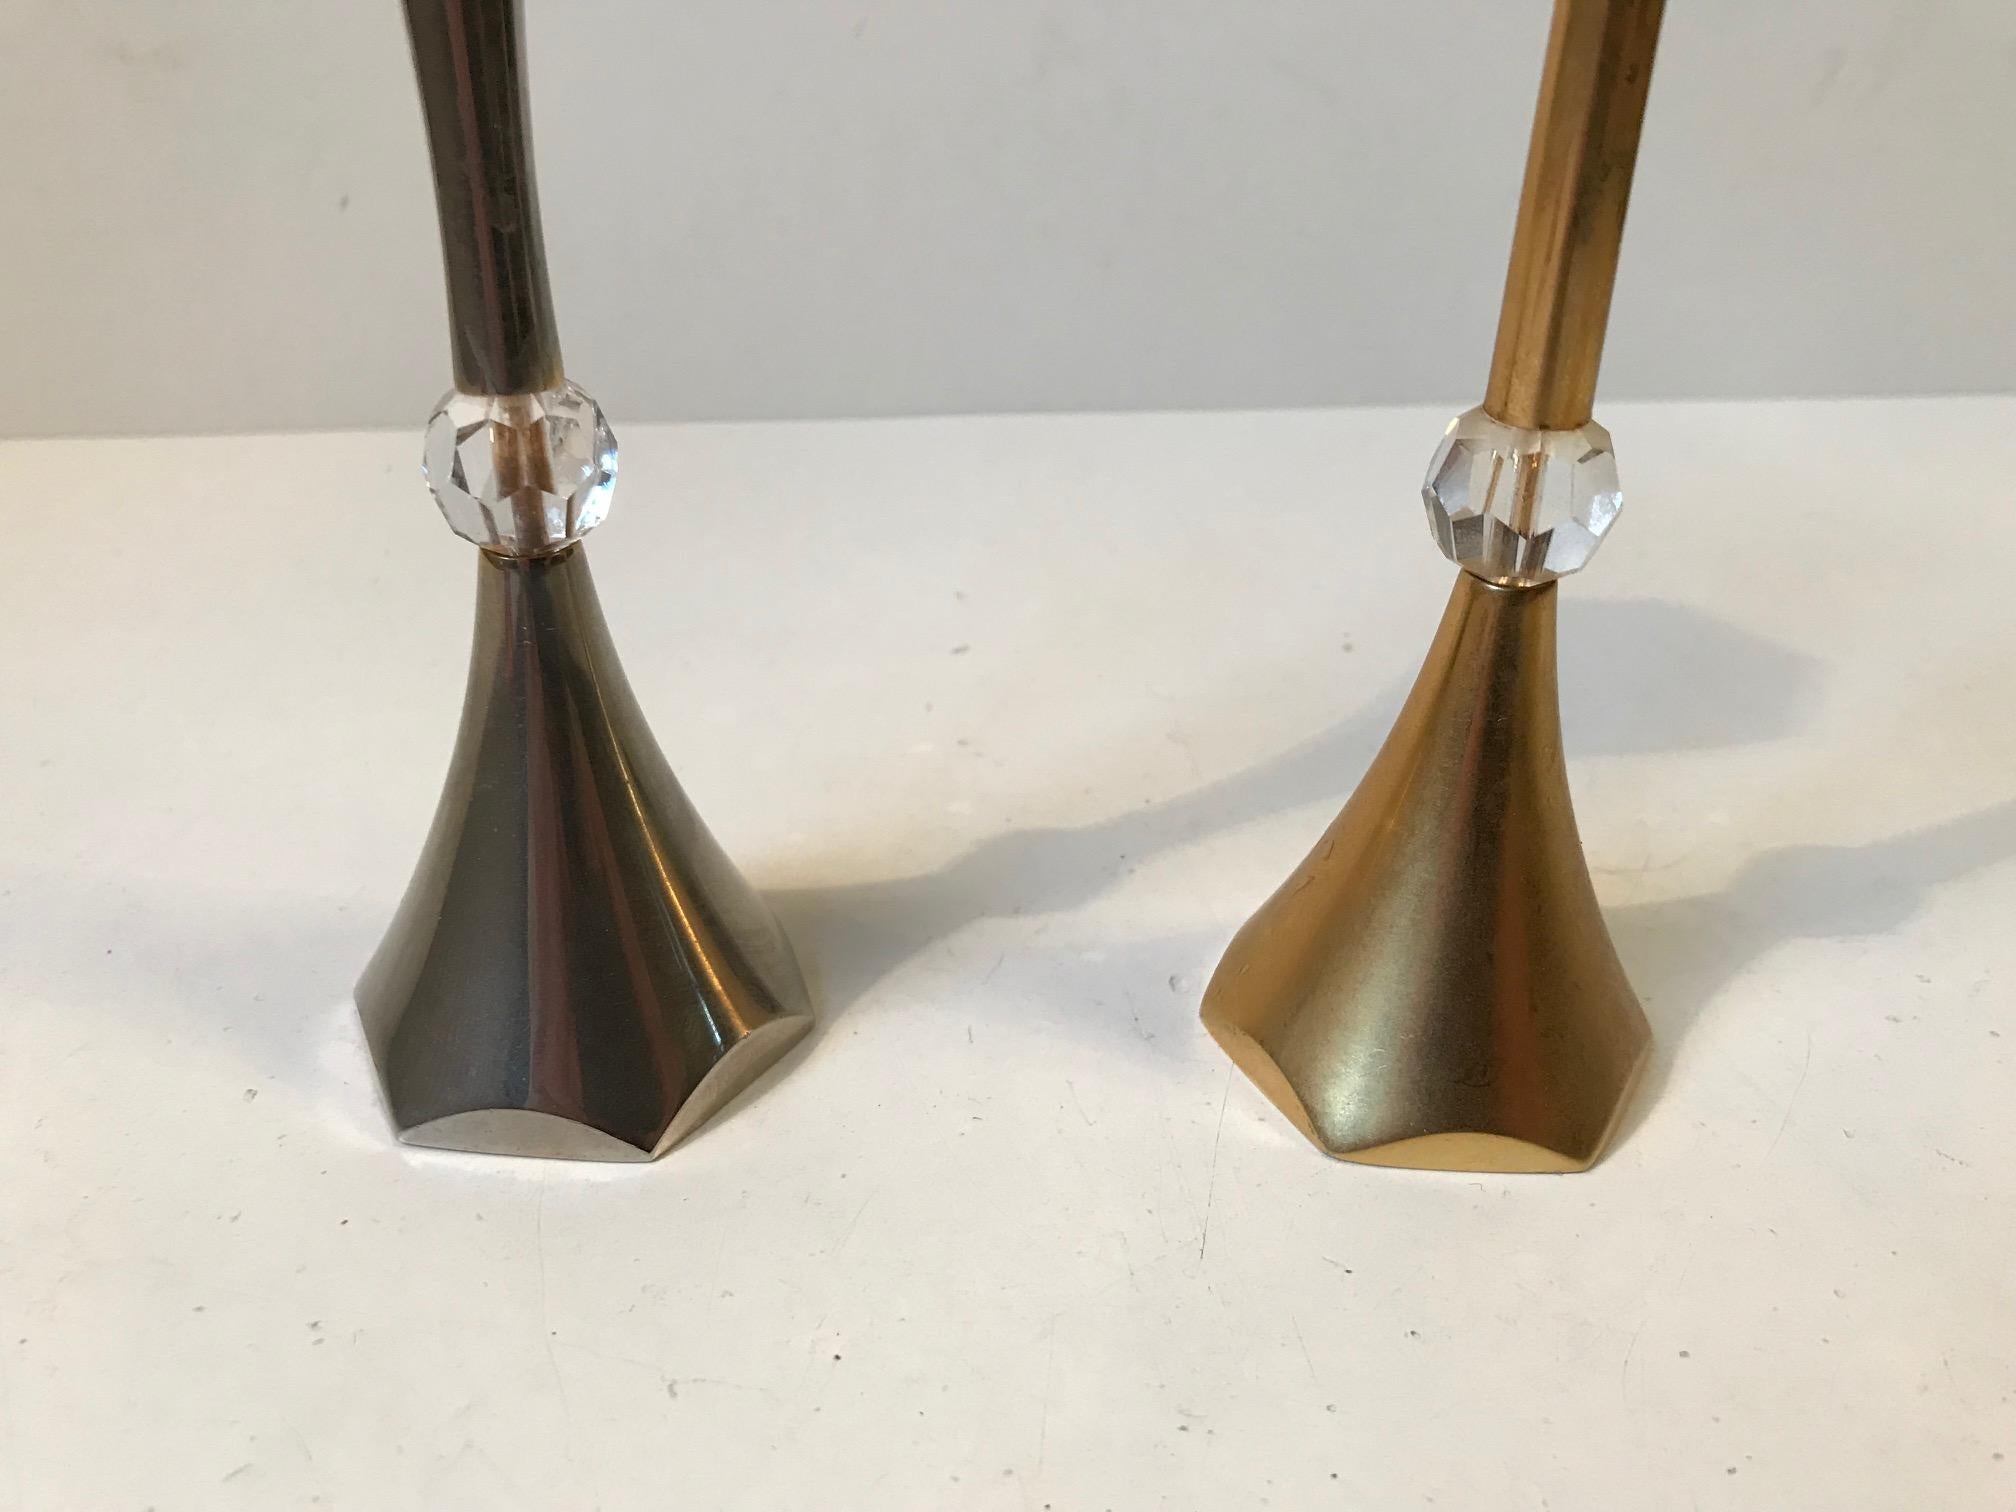 Danish Midcentury Gold-Plated Candlesticks by Hugo Asmussen, 1960s For Sale 1